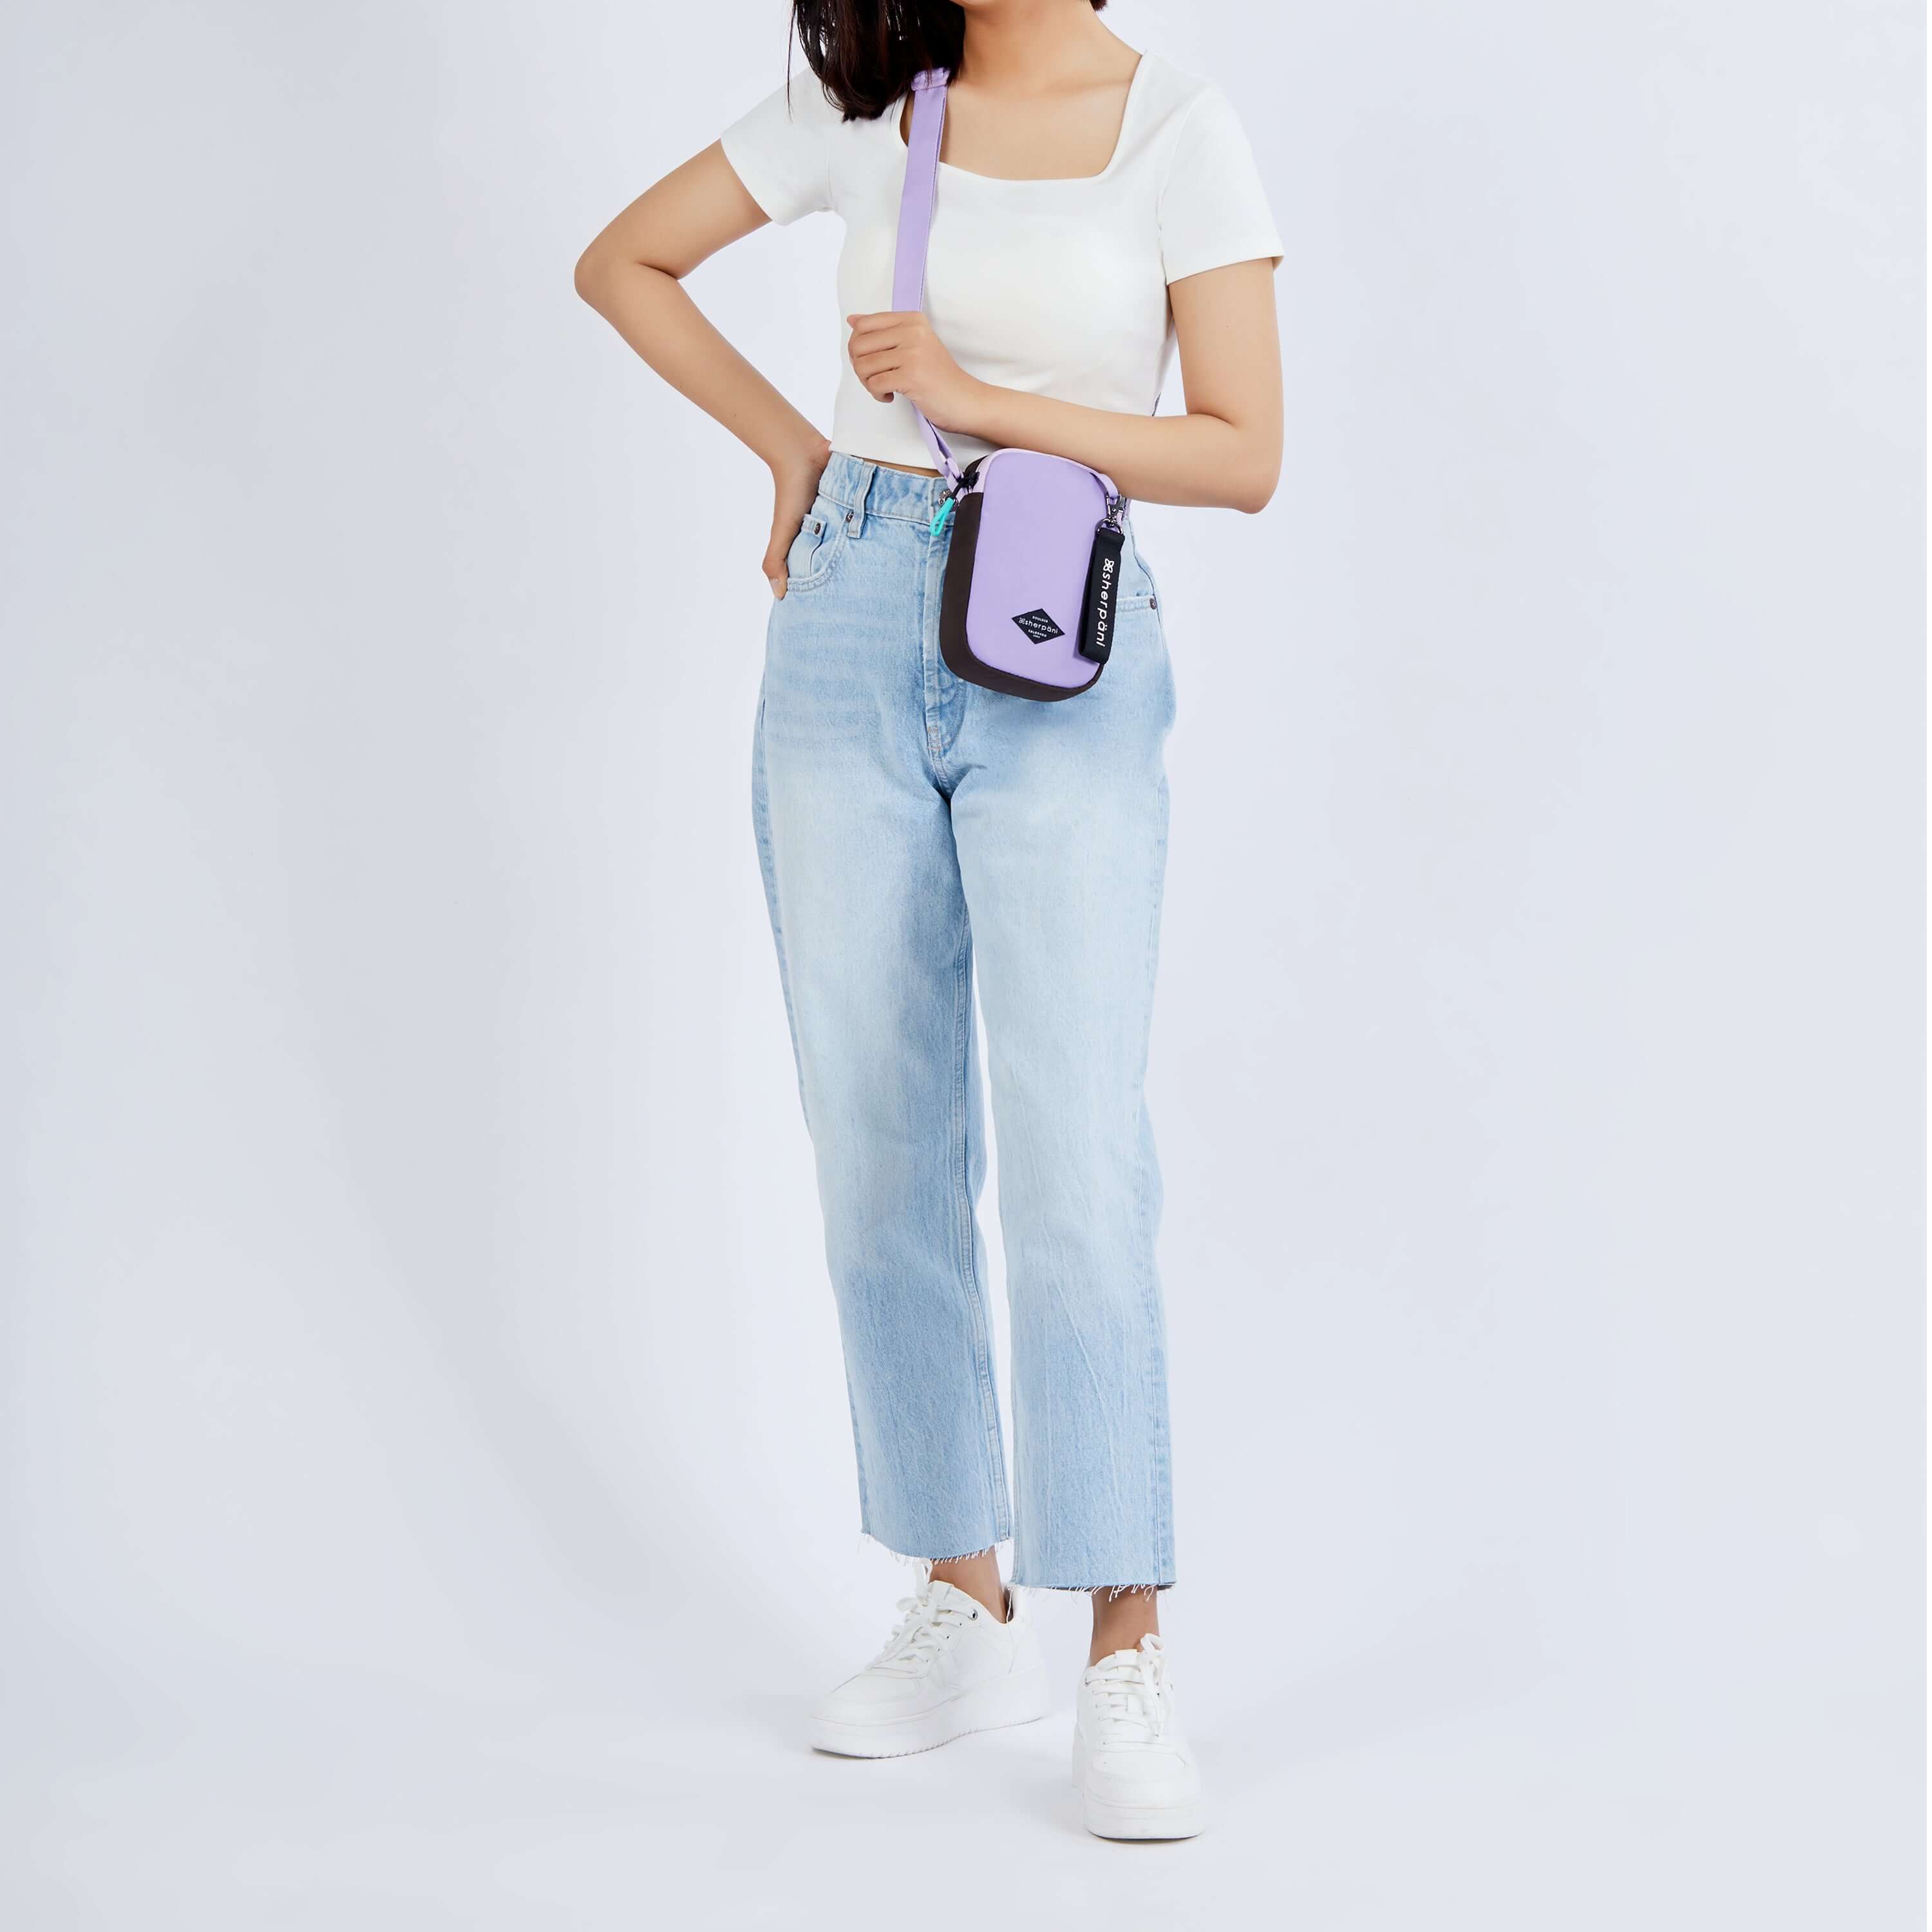 Full body view of a dark haired model facing the camera. She is wearing a white tee shirt, jeans and white sneakers. She carries Sherpani crossbody, the Rogue in Lavender, as a crossbody.